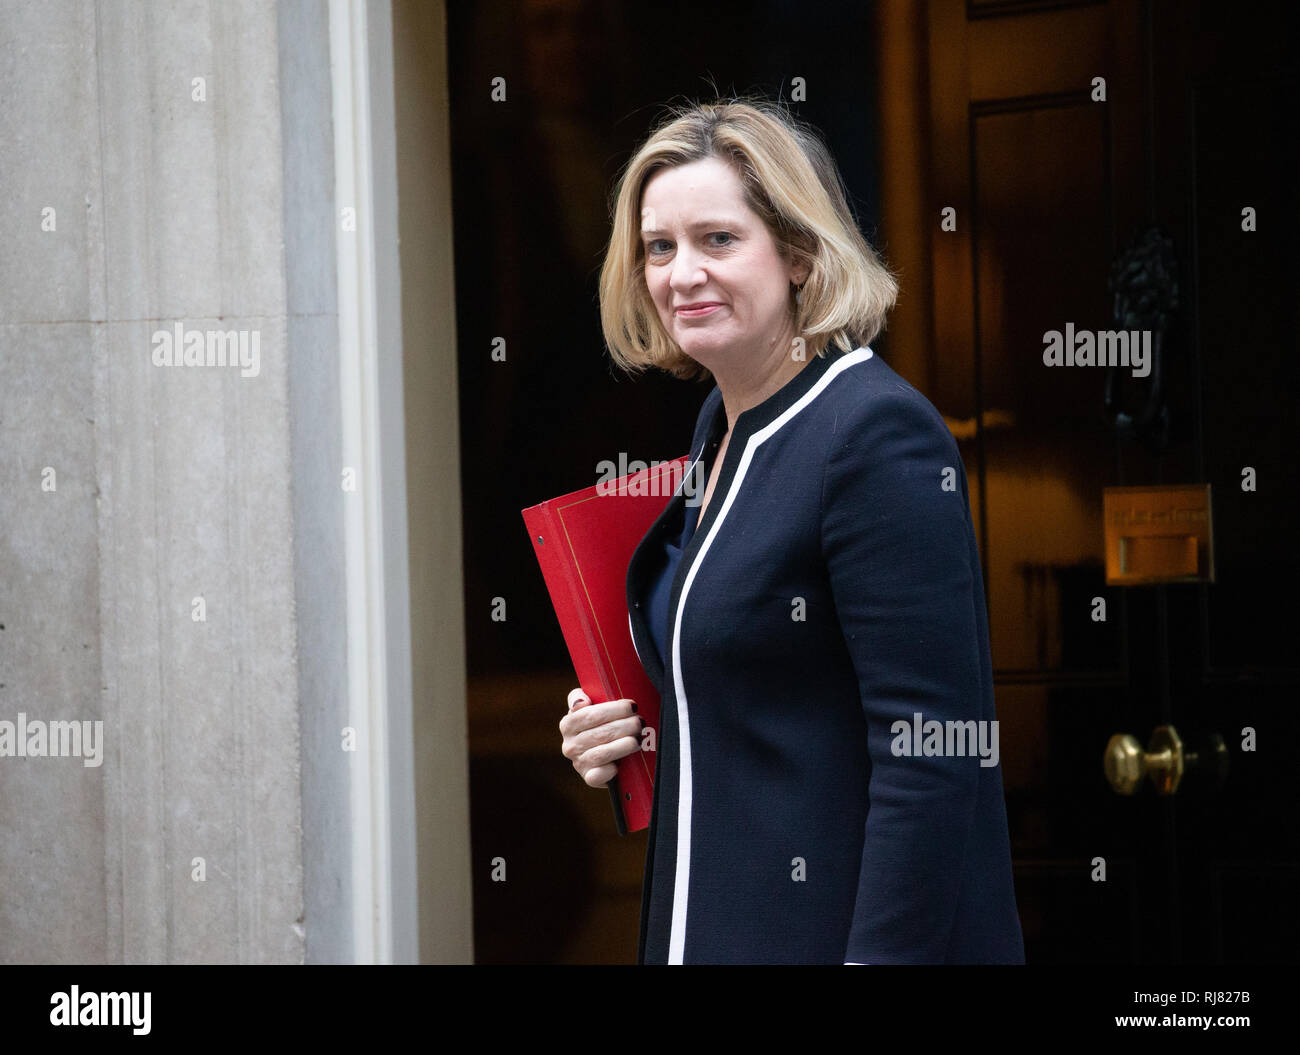 London, UK. 05th Feb, 2019. Amber Rudd, Secretary of State for Work and Pensions, arrives for the Cabinet Meeting. Credit: Tommy London/Alamy Live News Stock Photo